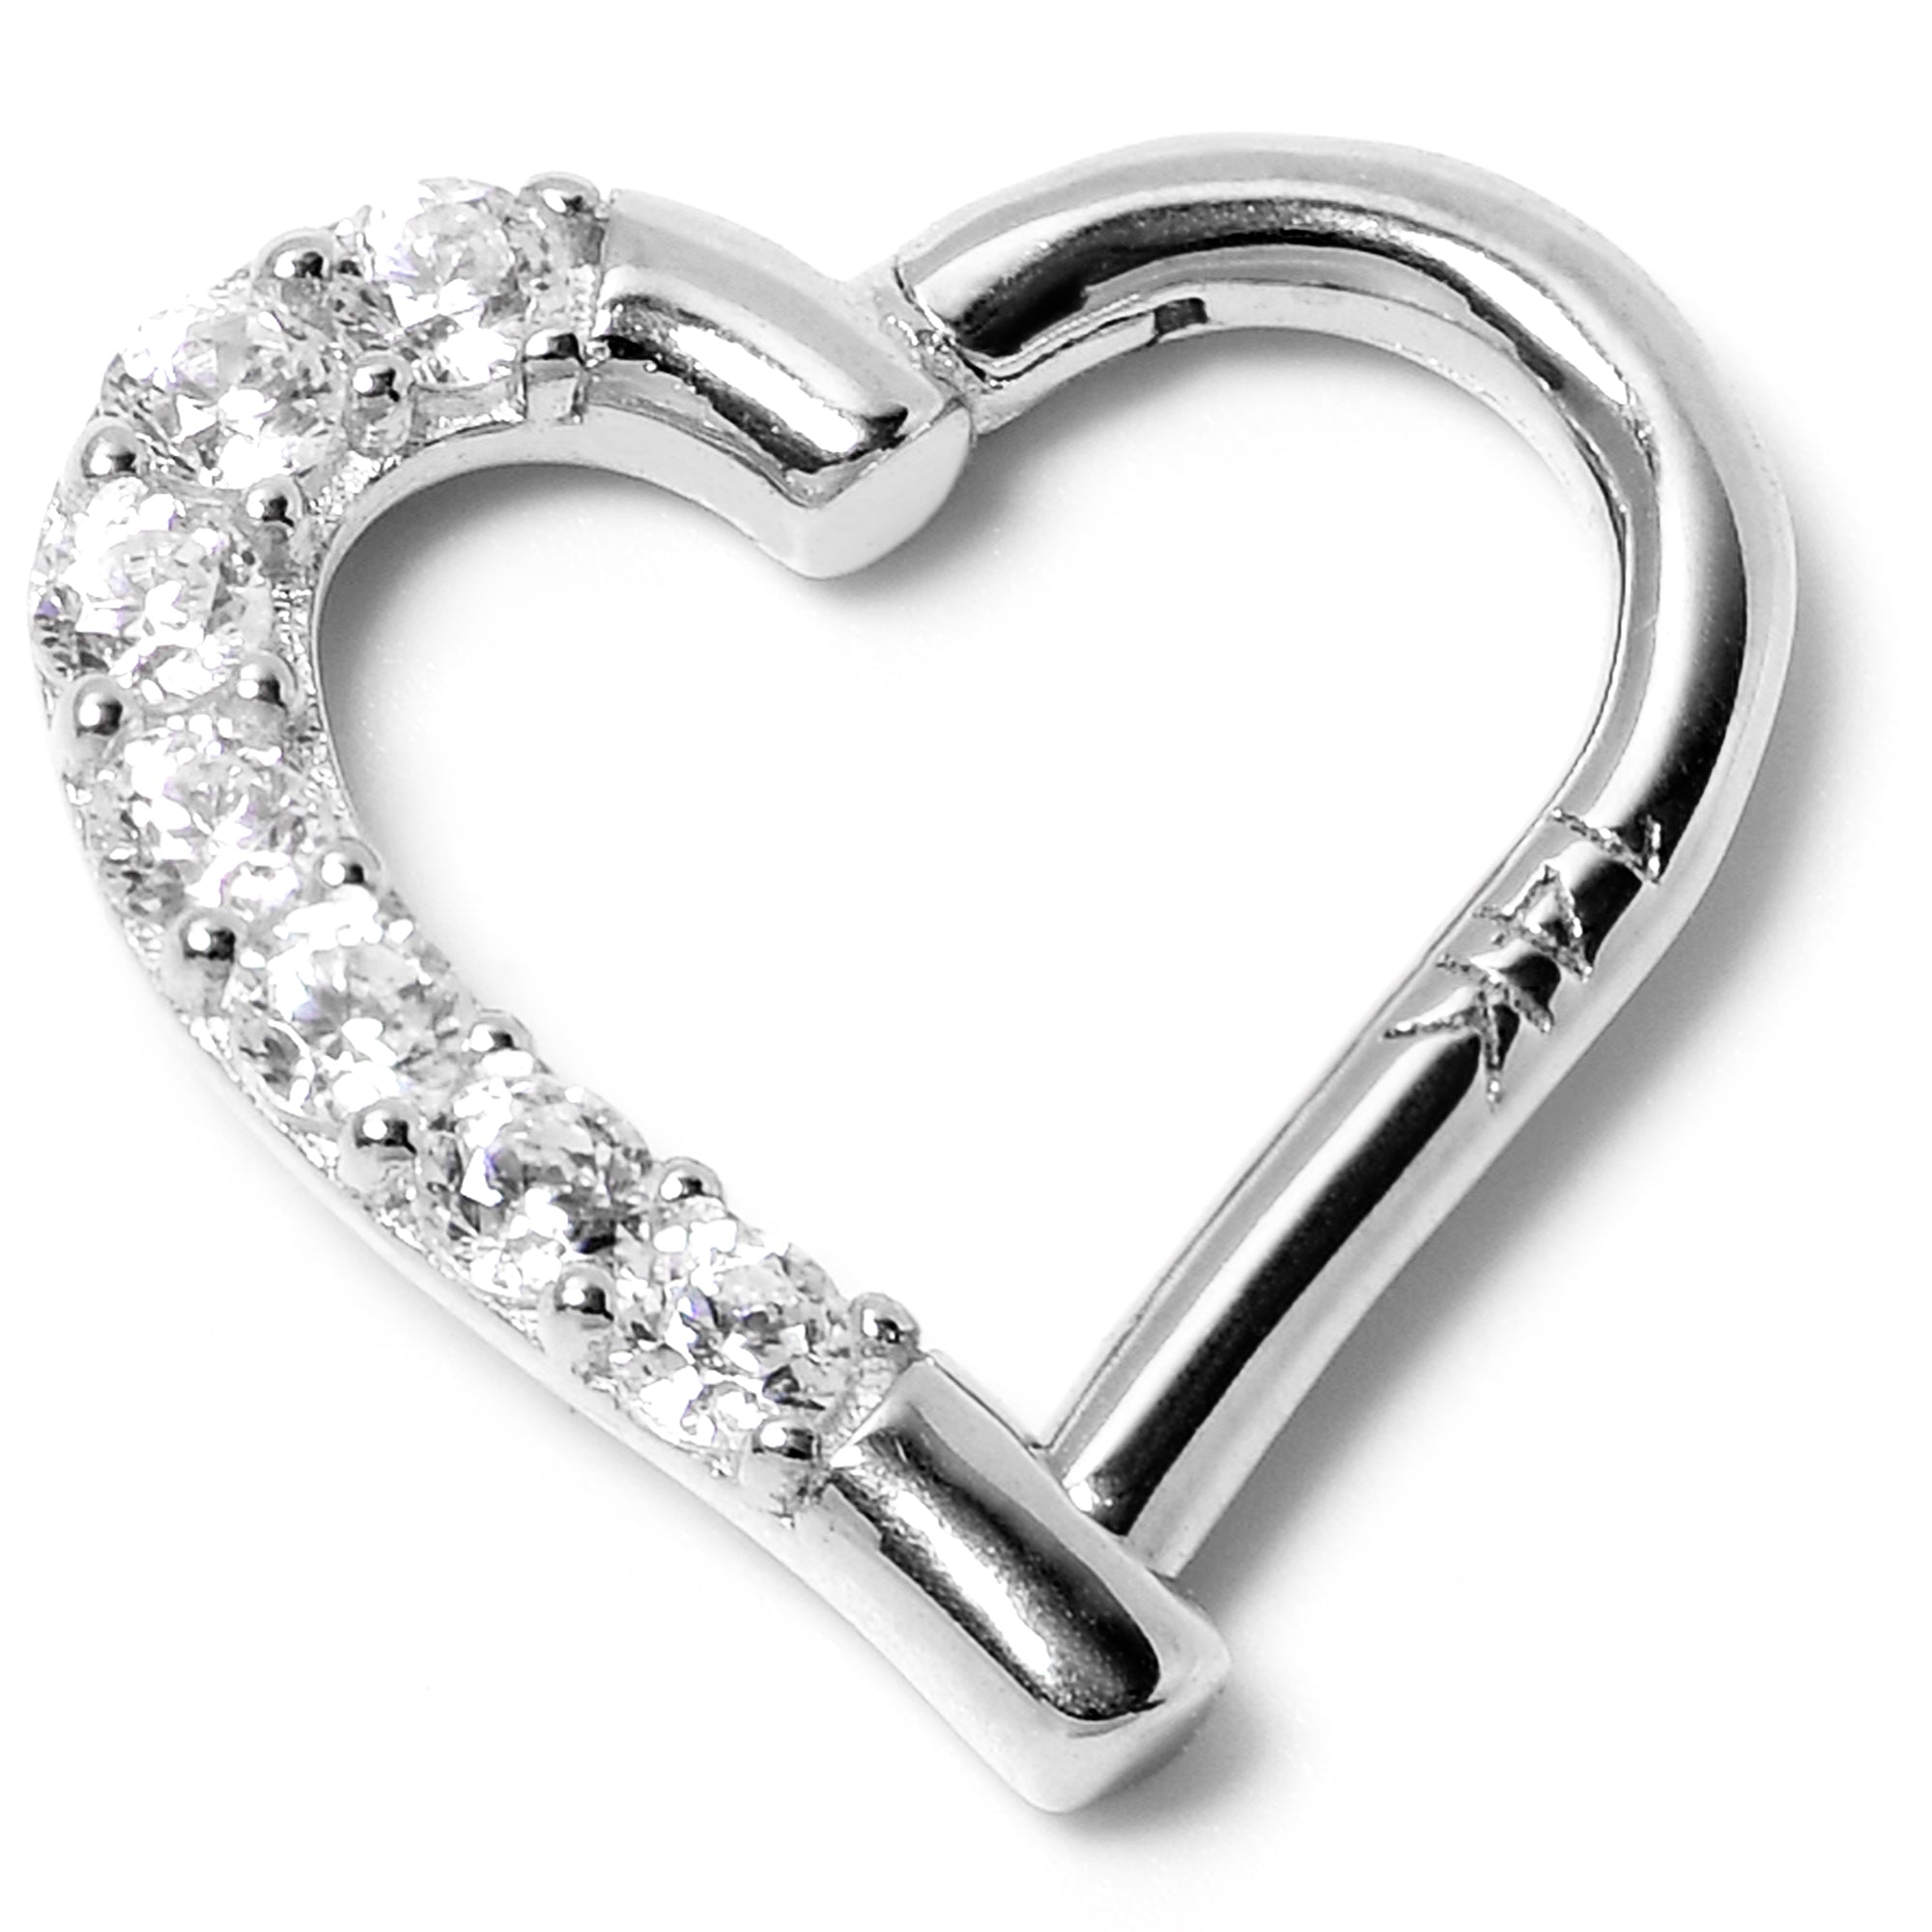 16 Gauge 5/16 14k White Gold CZ Paved Ultra Luxe Right Hinged Heart Segment Ring